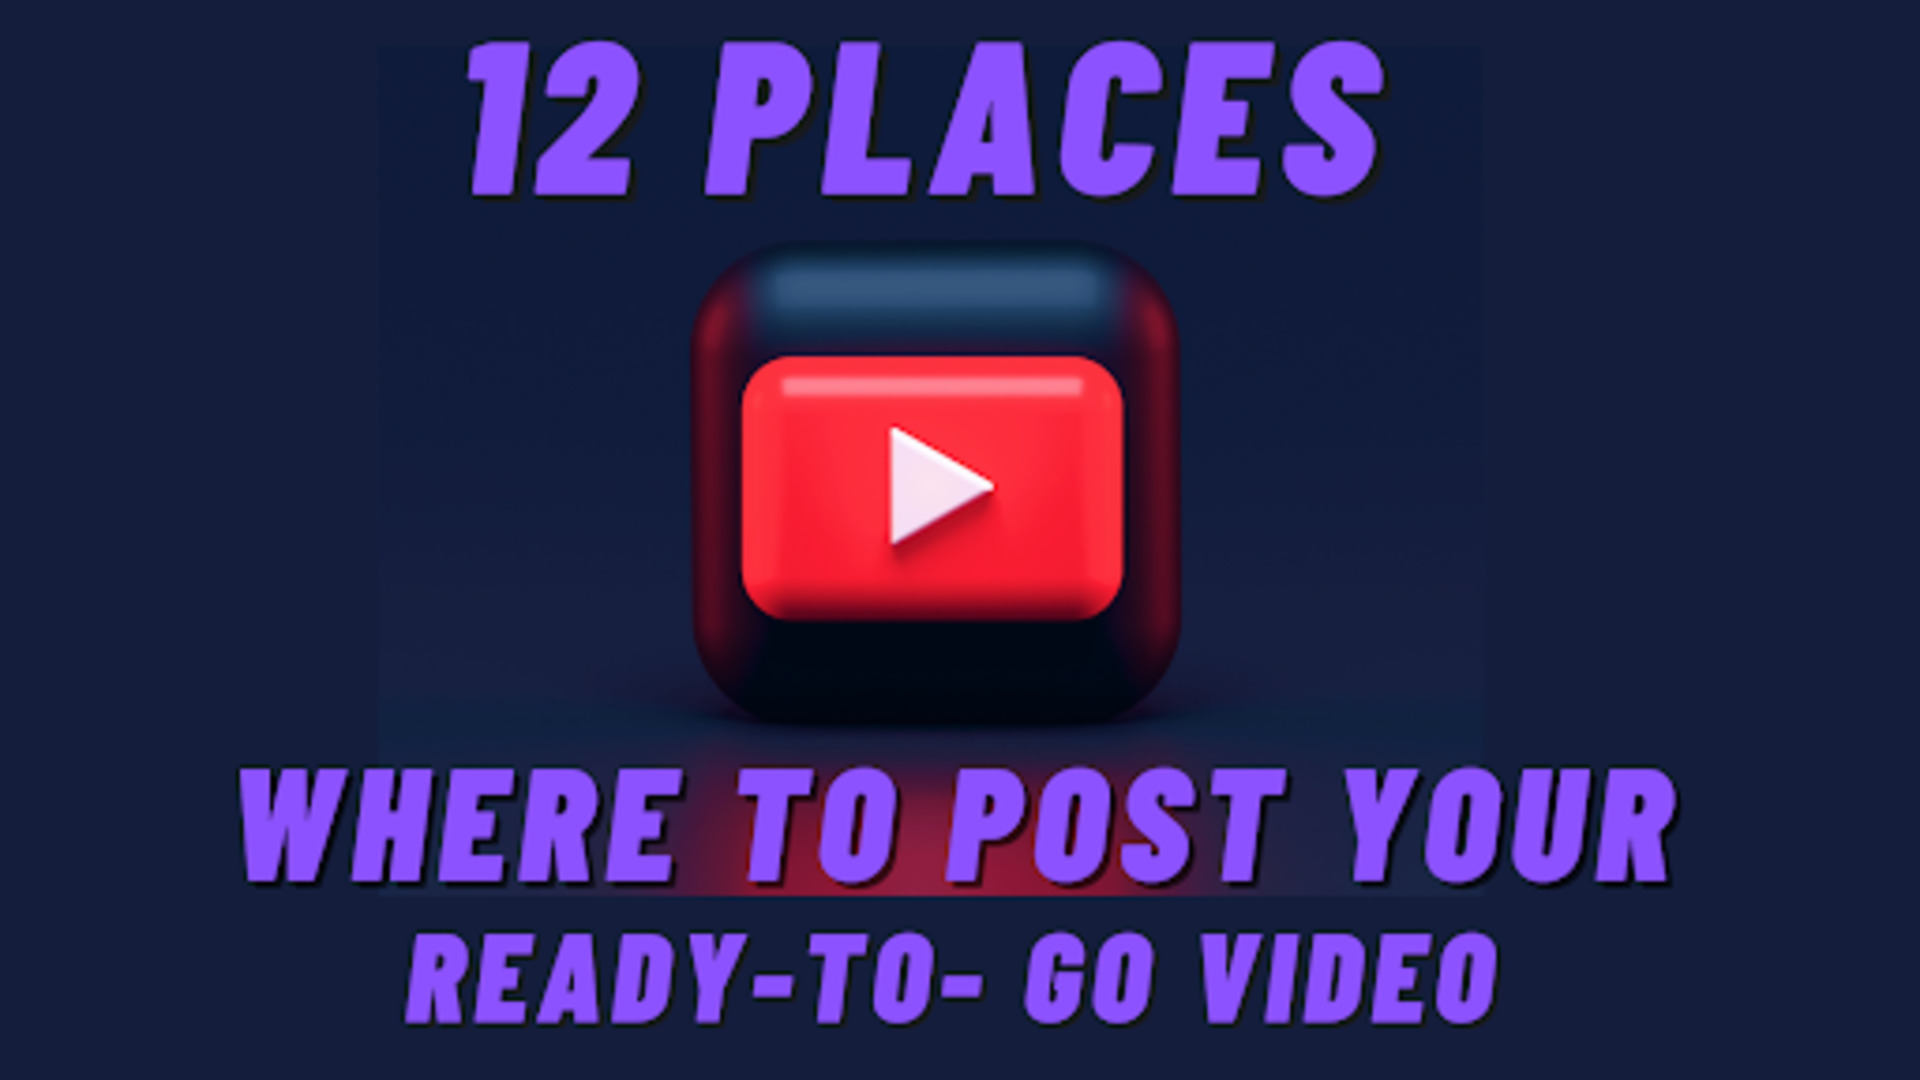 12 best places where to post your ready-to-go video